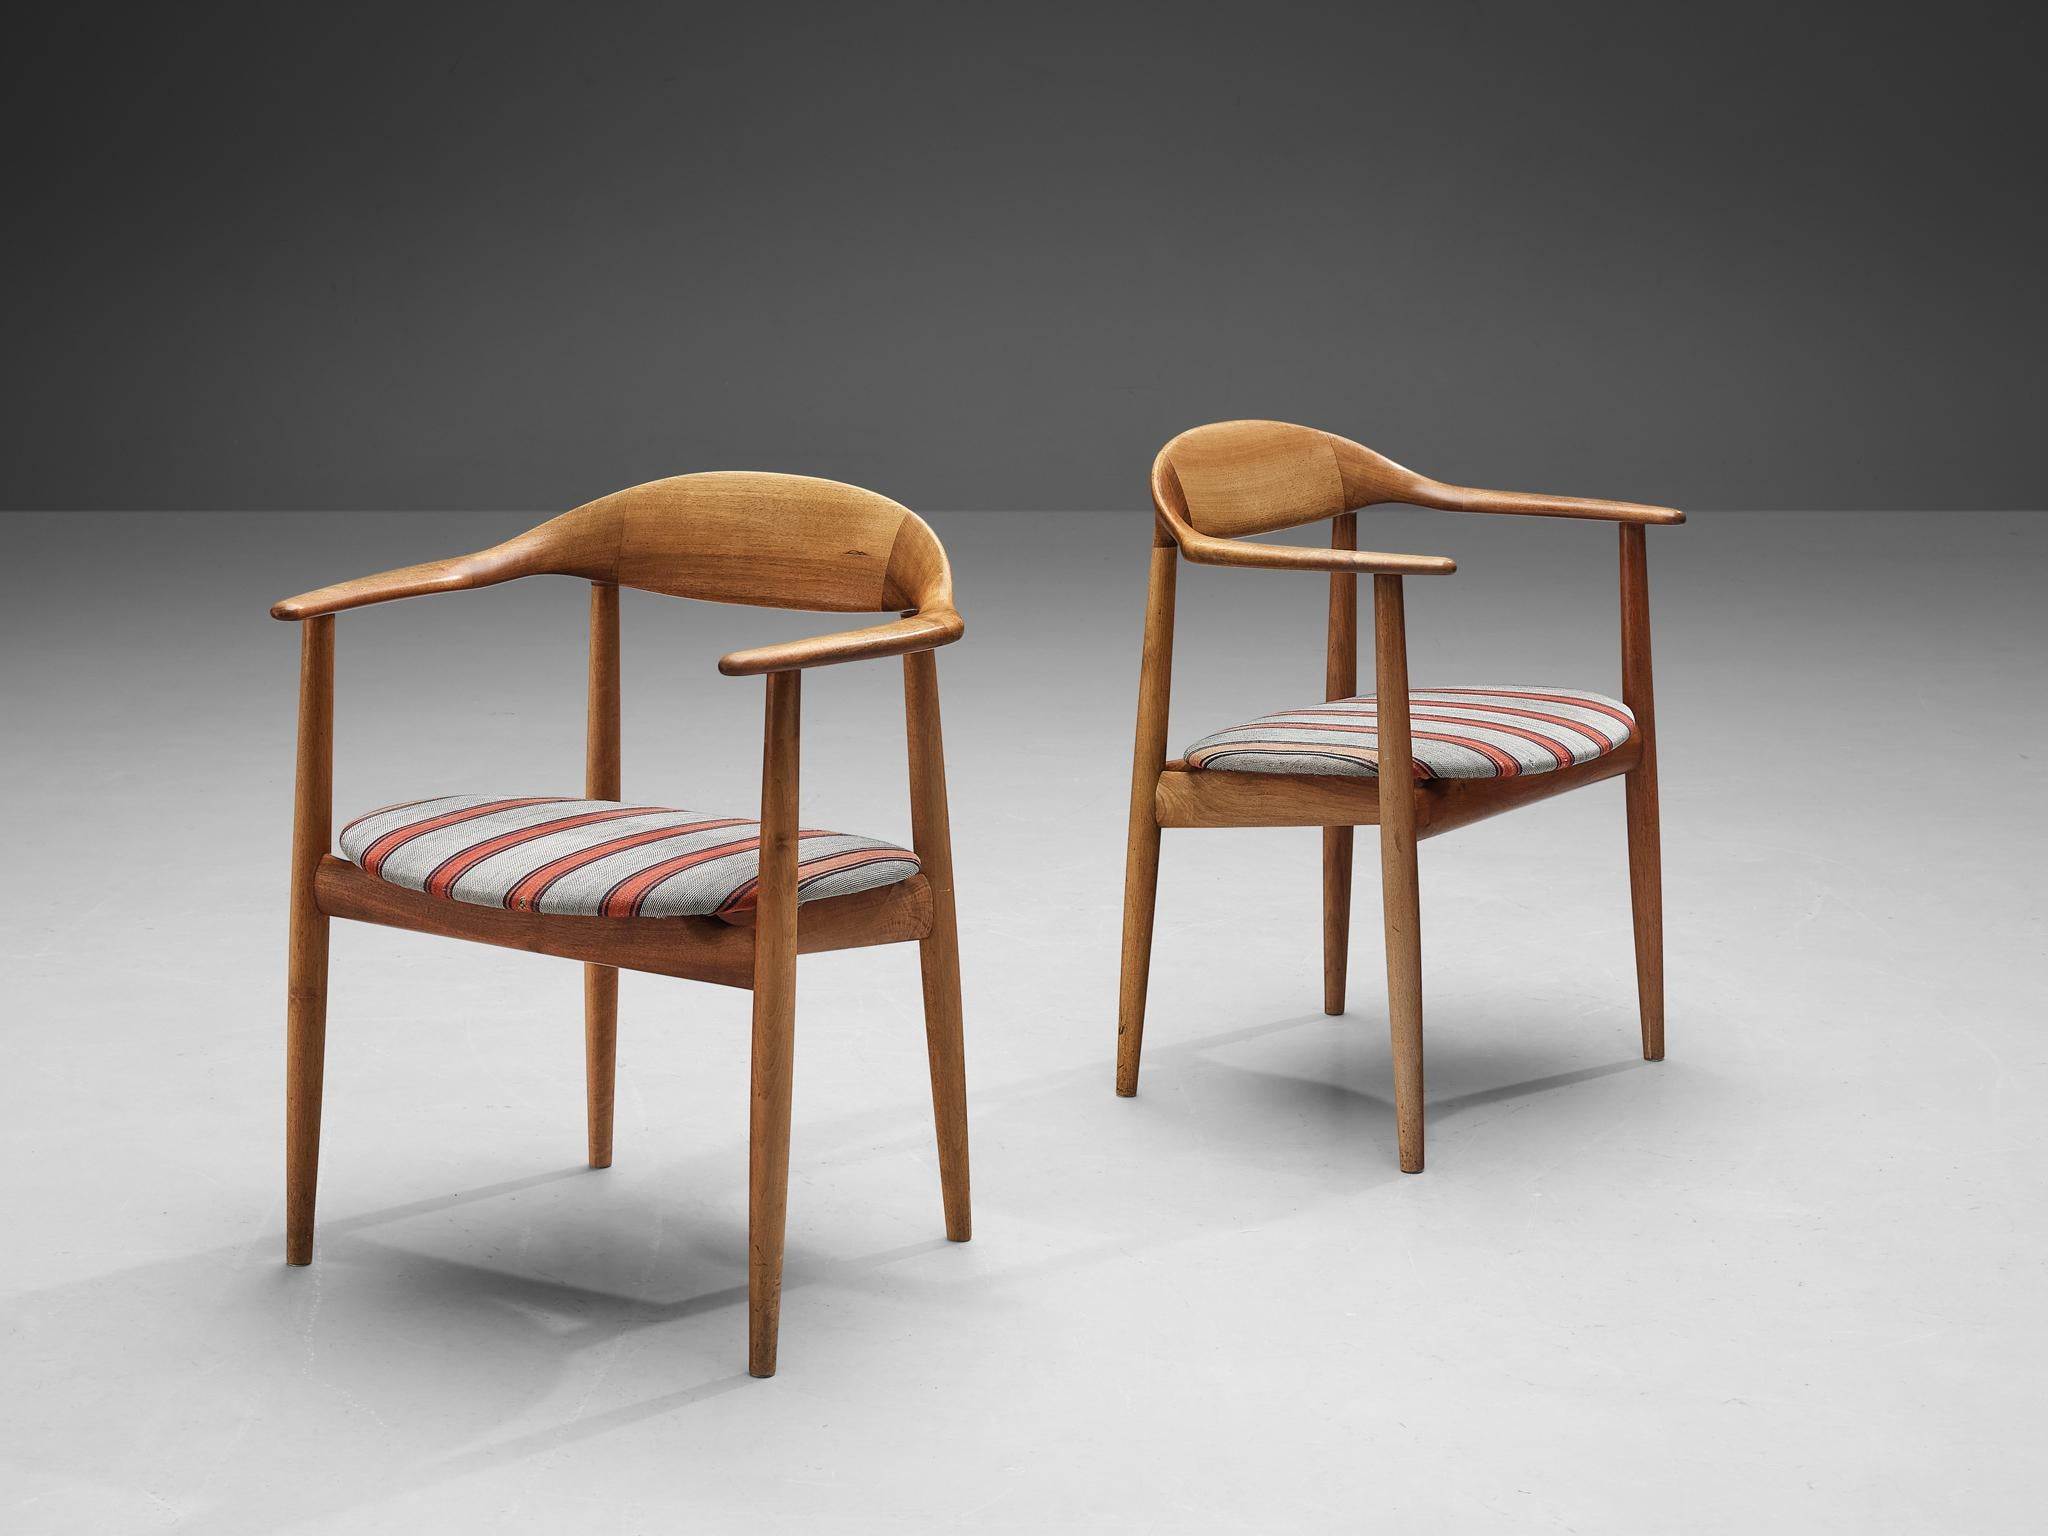 Kurt Østervig for Brande Møbelindustri, armchairs, model '27', walnut, fabric, Denmark, 1950s. 

This organic looking pair of armchairs are made with an outstanding attention to detail as seen in the finish of the wooden joints. Executed in the